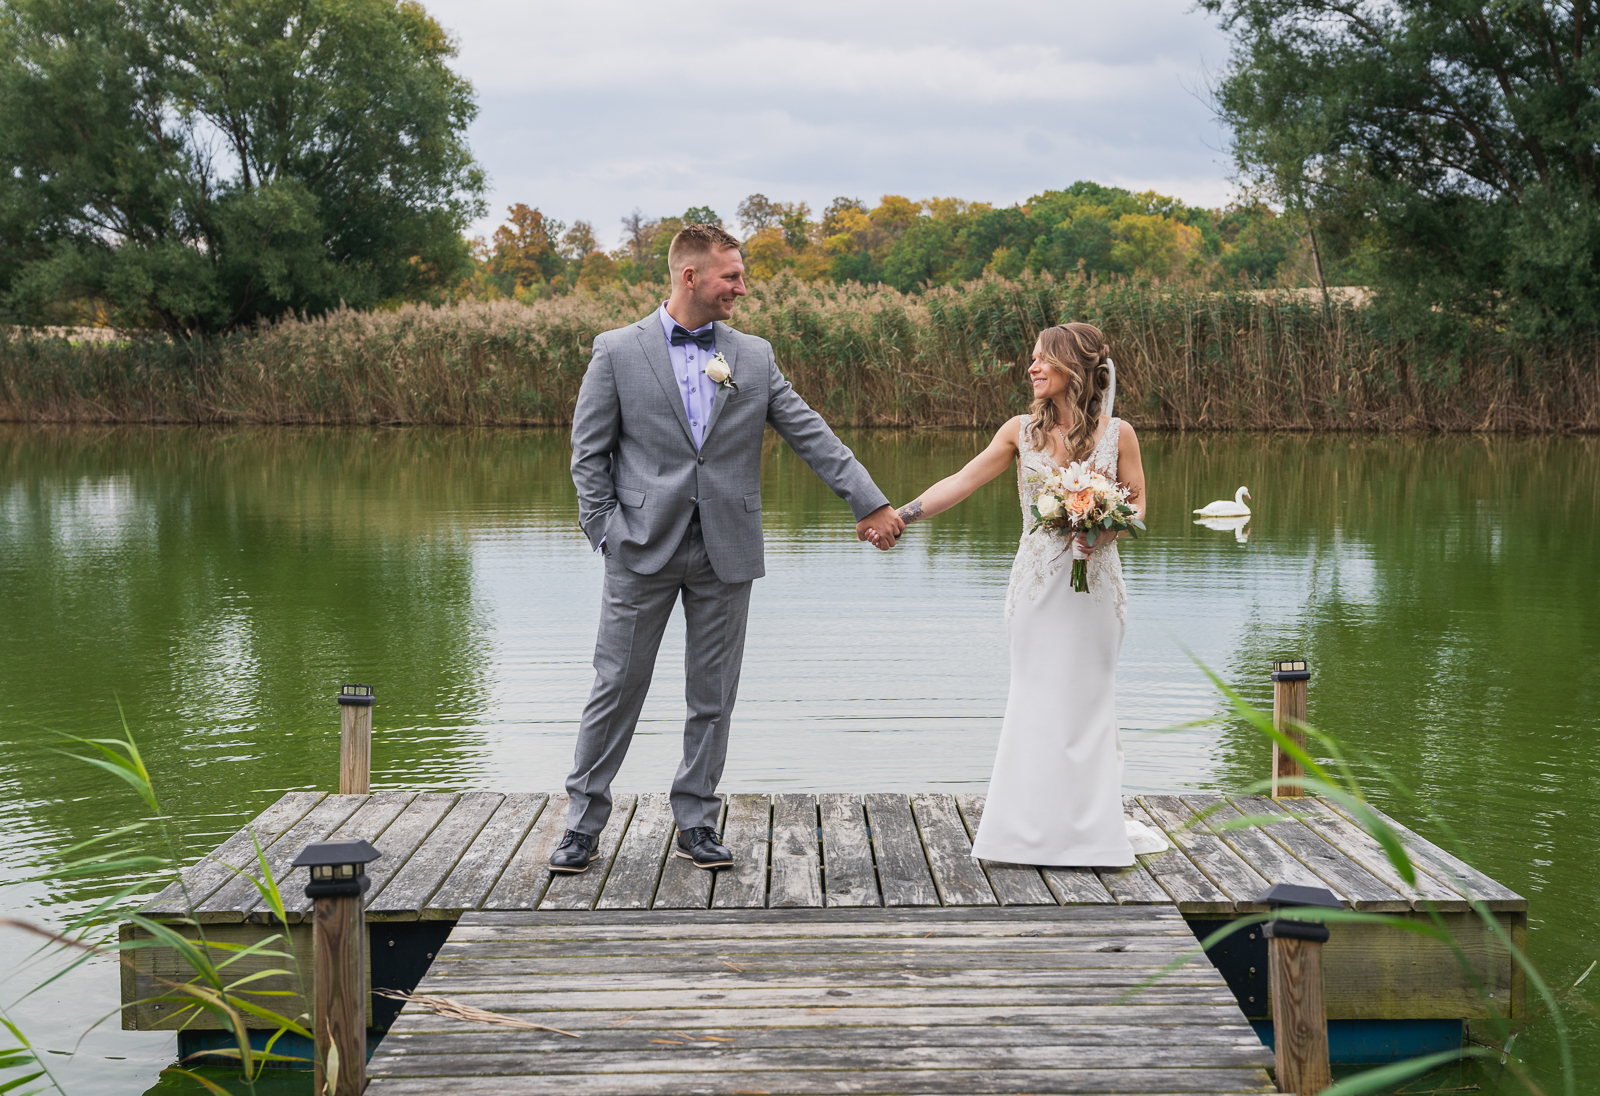 Bride and groom wedding portrait, dock, pond, duck, goose, nature, fall wedding, rustic outdoor wedding ceremony at White Birch Barn